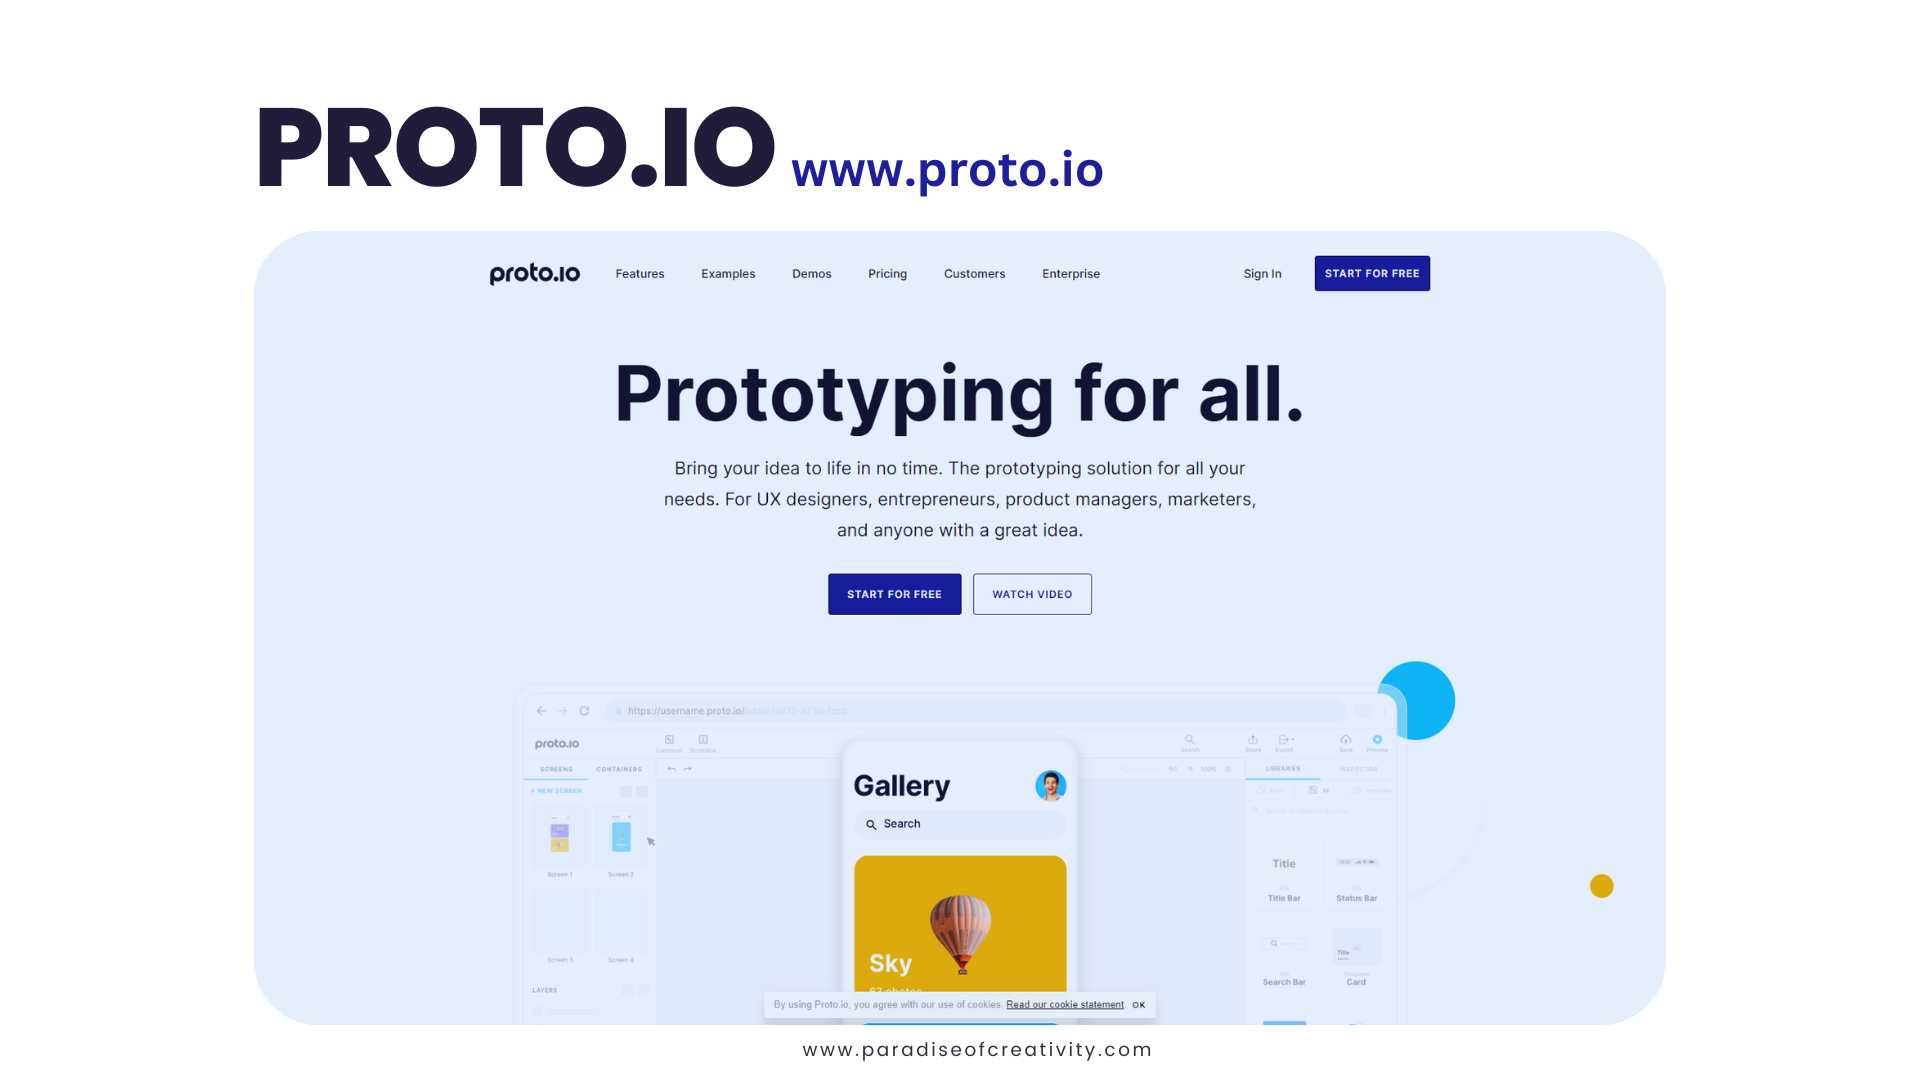 Proto.io's software allows you to create a variety of different types of prototypes, including mobile and web-based designs, and offers a range of pre-designed templates and widgets to help you get started quickly. With its drag-and-drop interface, it's easy to move and resize elements, change colors and fonts, and add interactions and animations to your designs.